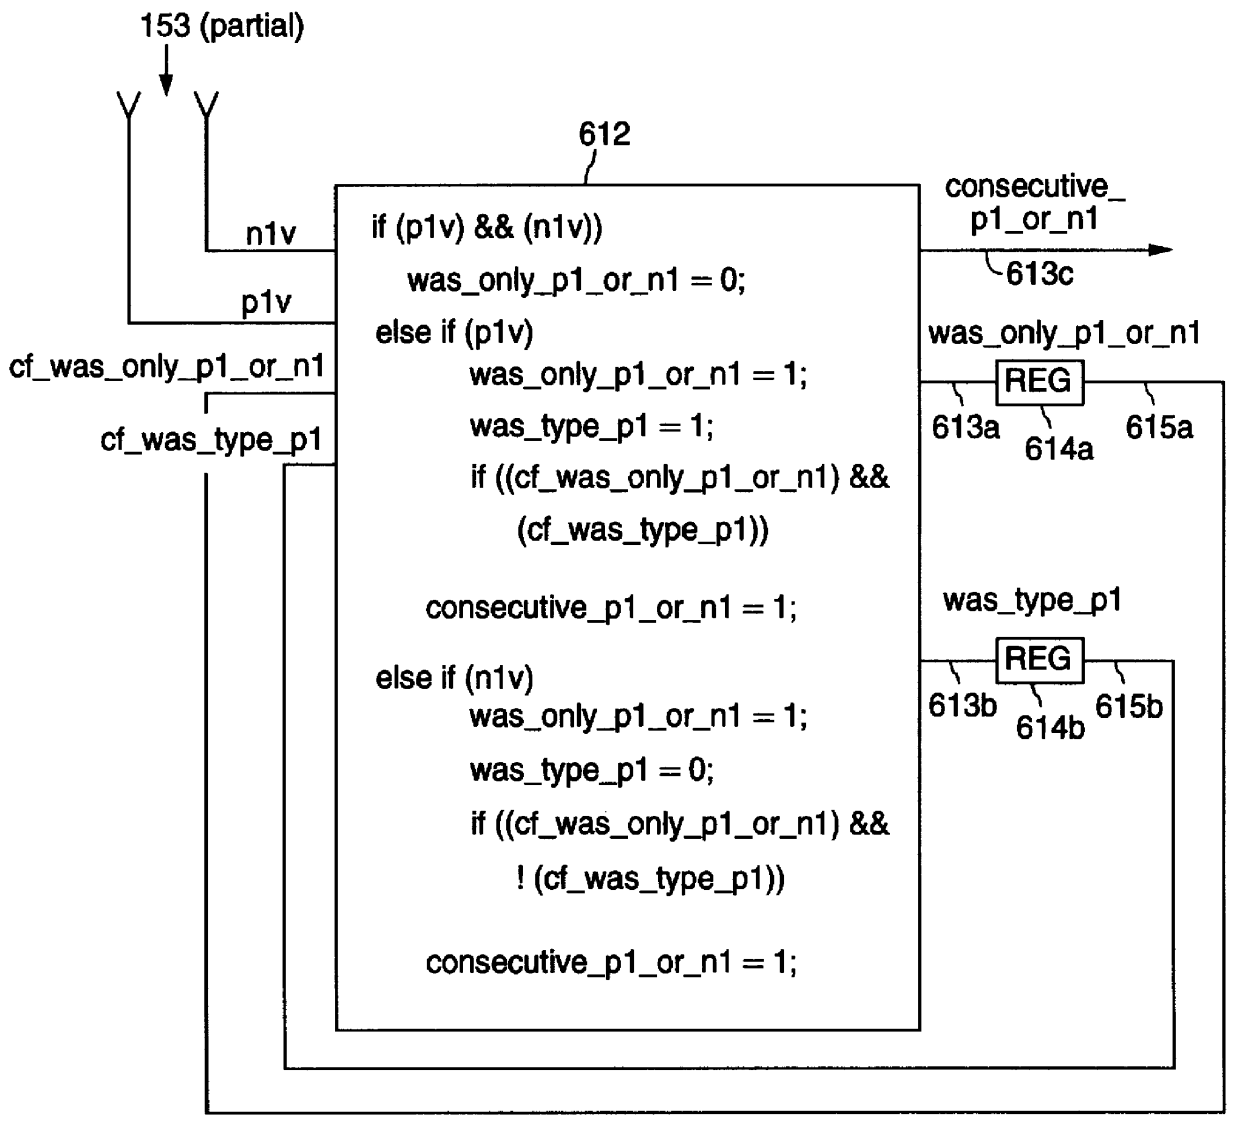 Distributive encoder for encoding error signals which represent signal peak errors in data signals for identifying erroneous signal baseline, peak and equalization conditions